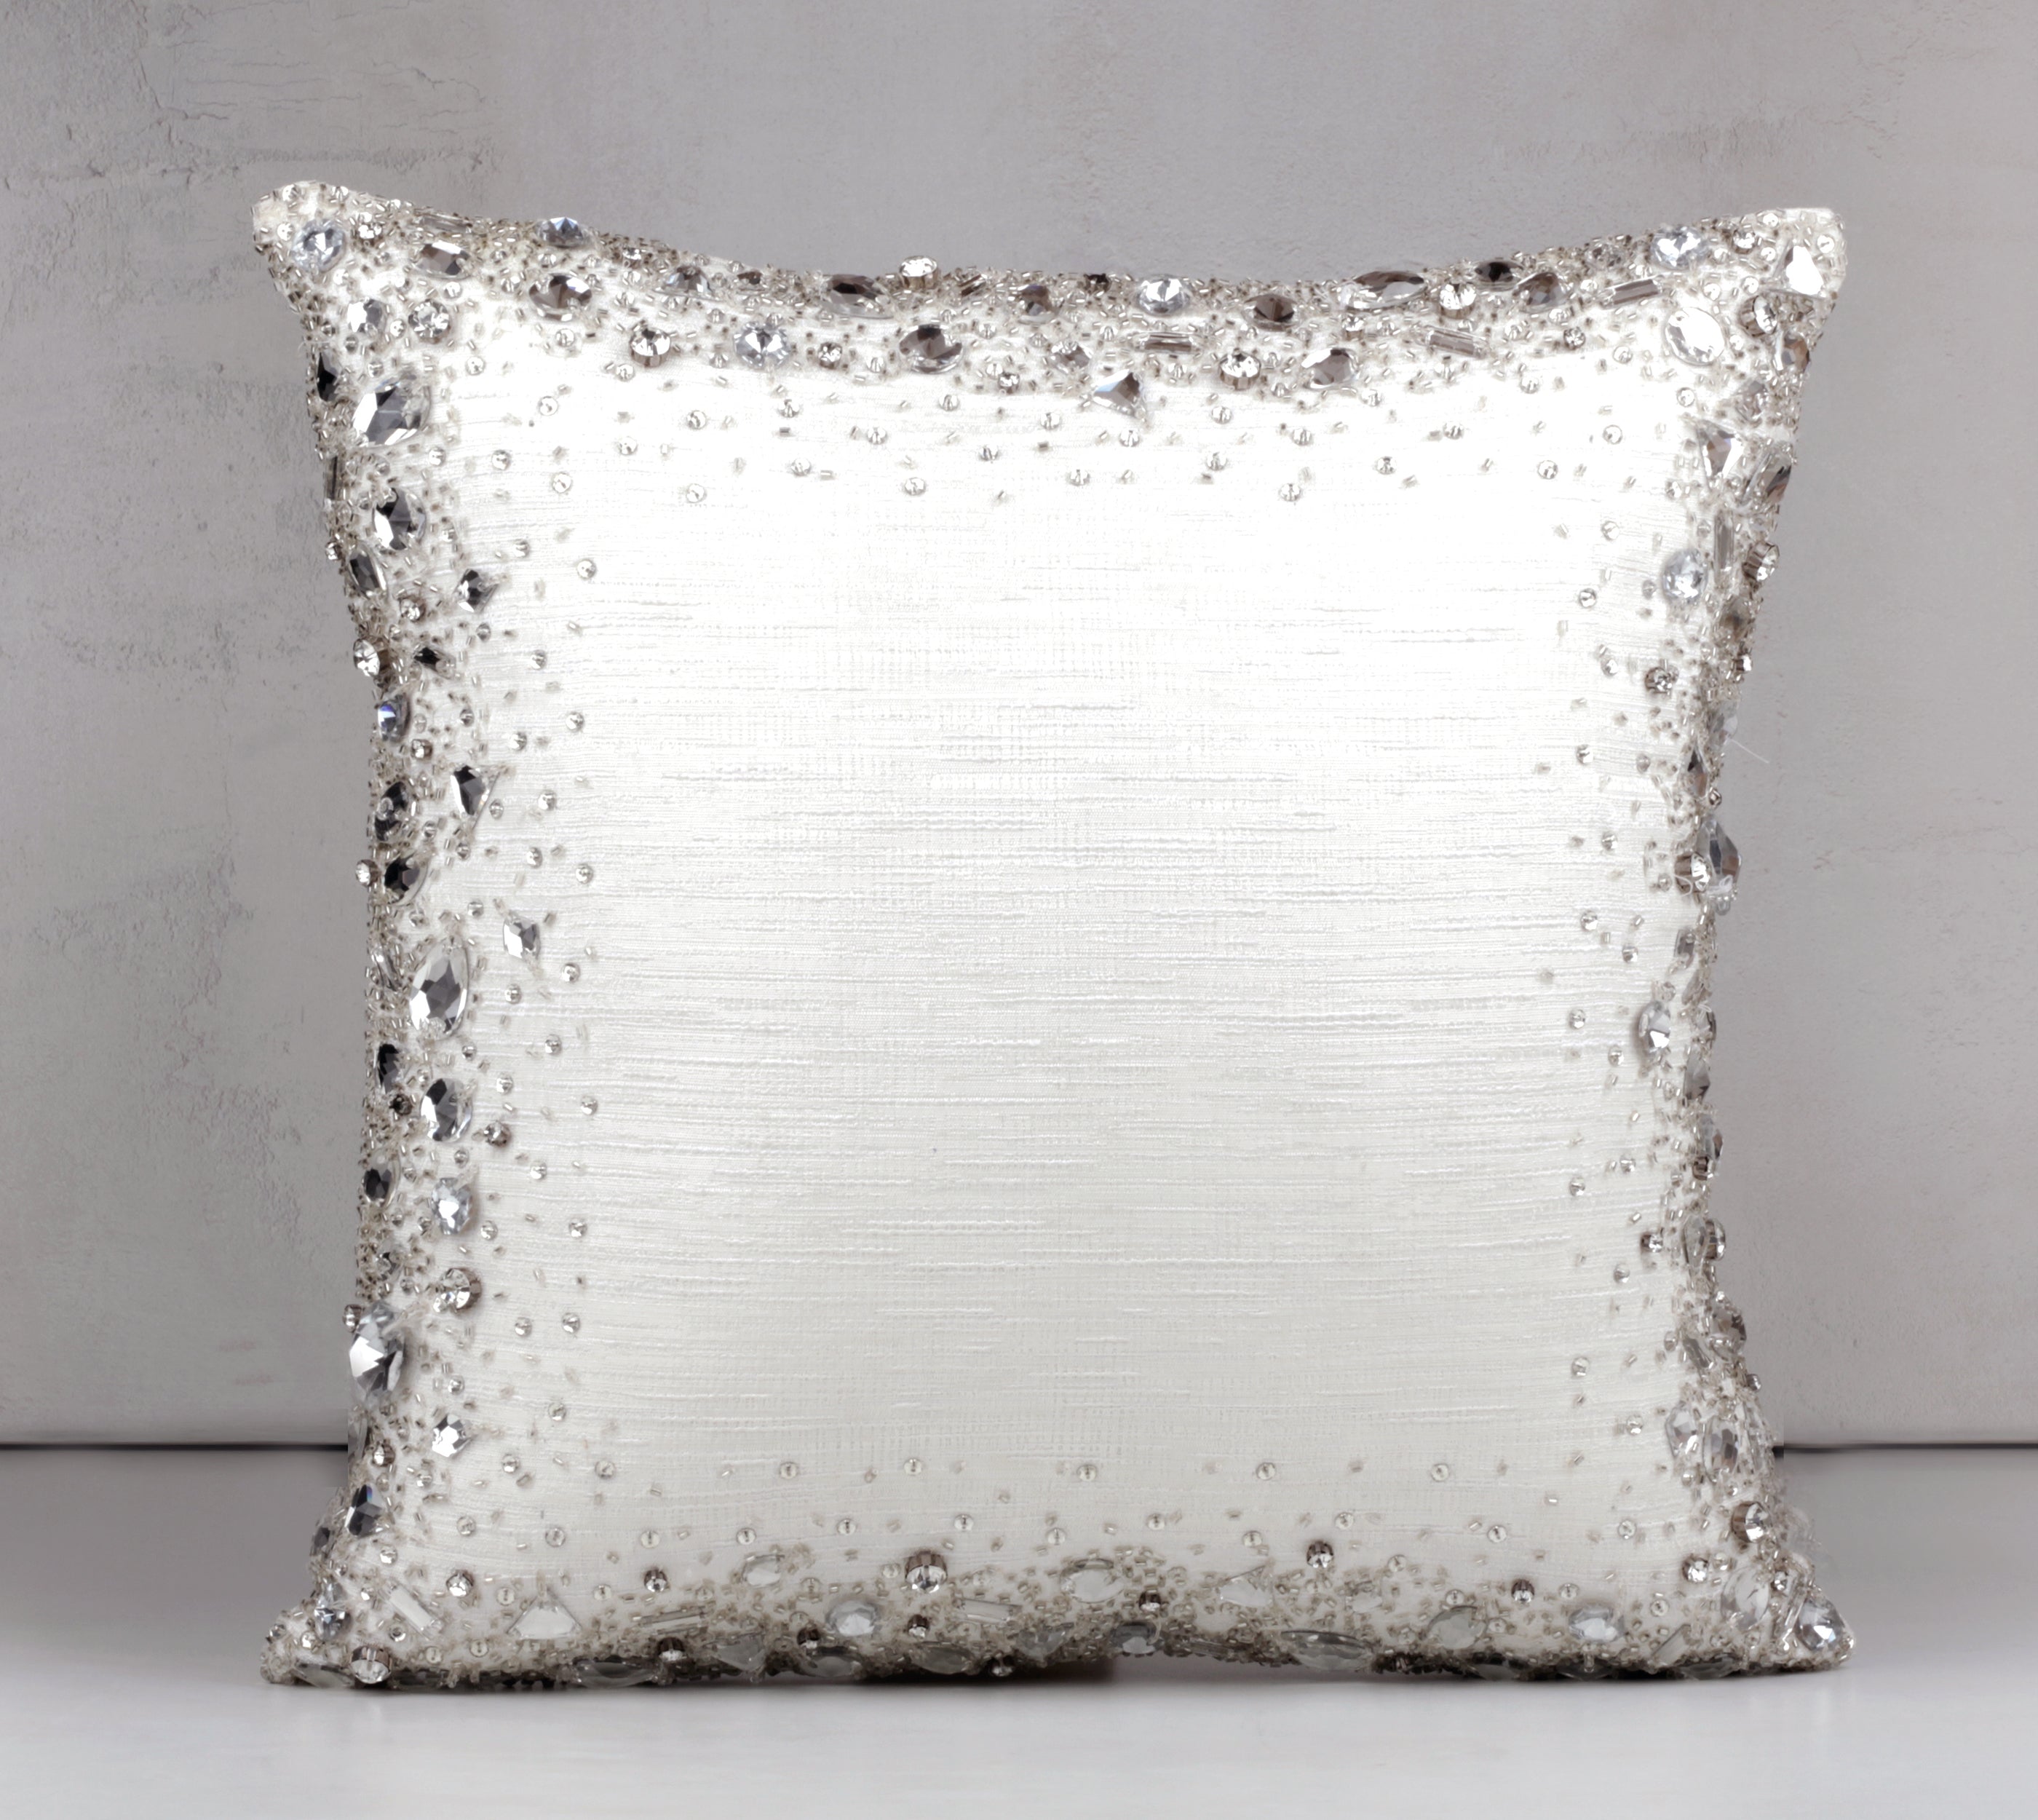 FORTUNE White and Silver Bling Cushion Cover